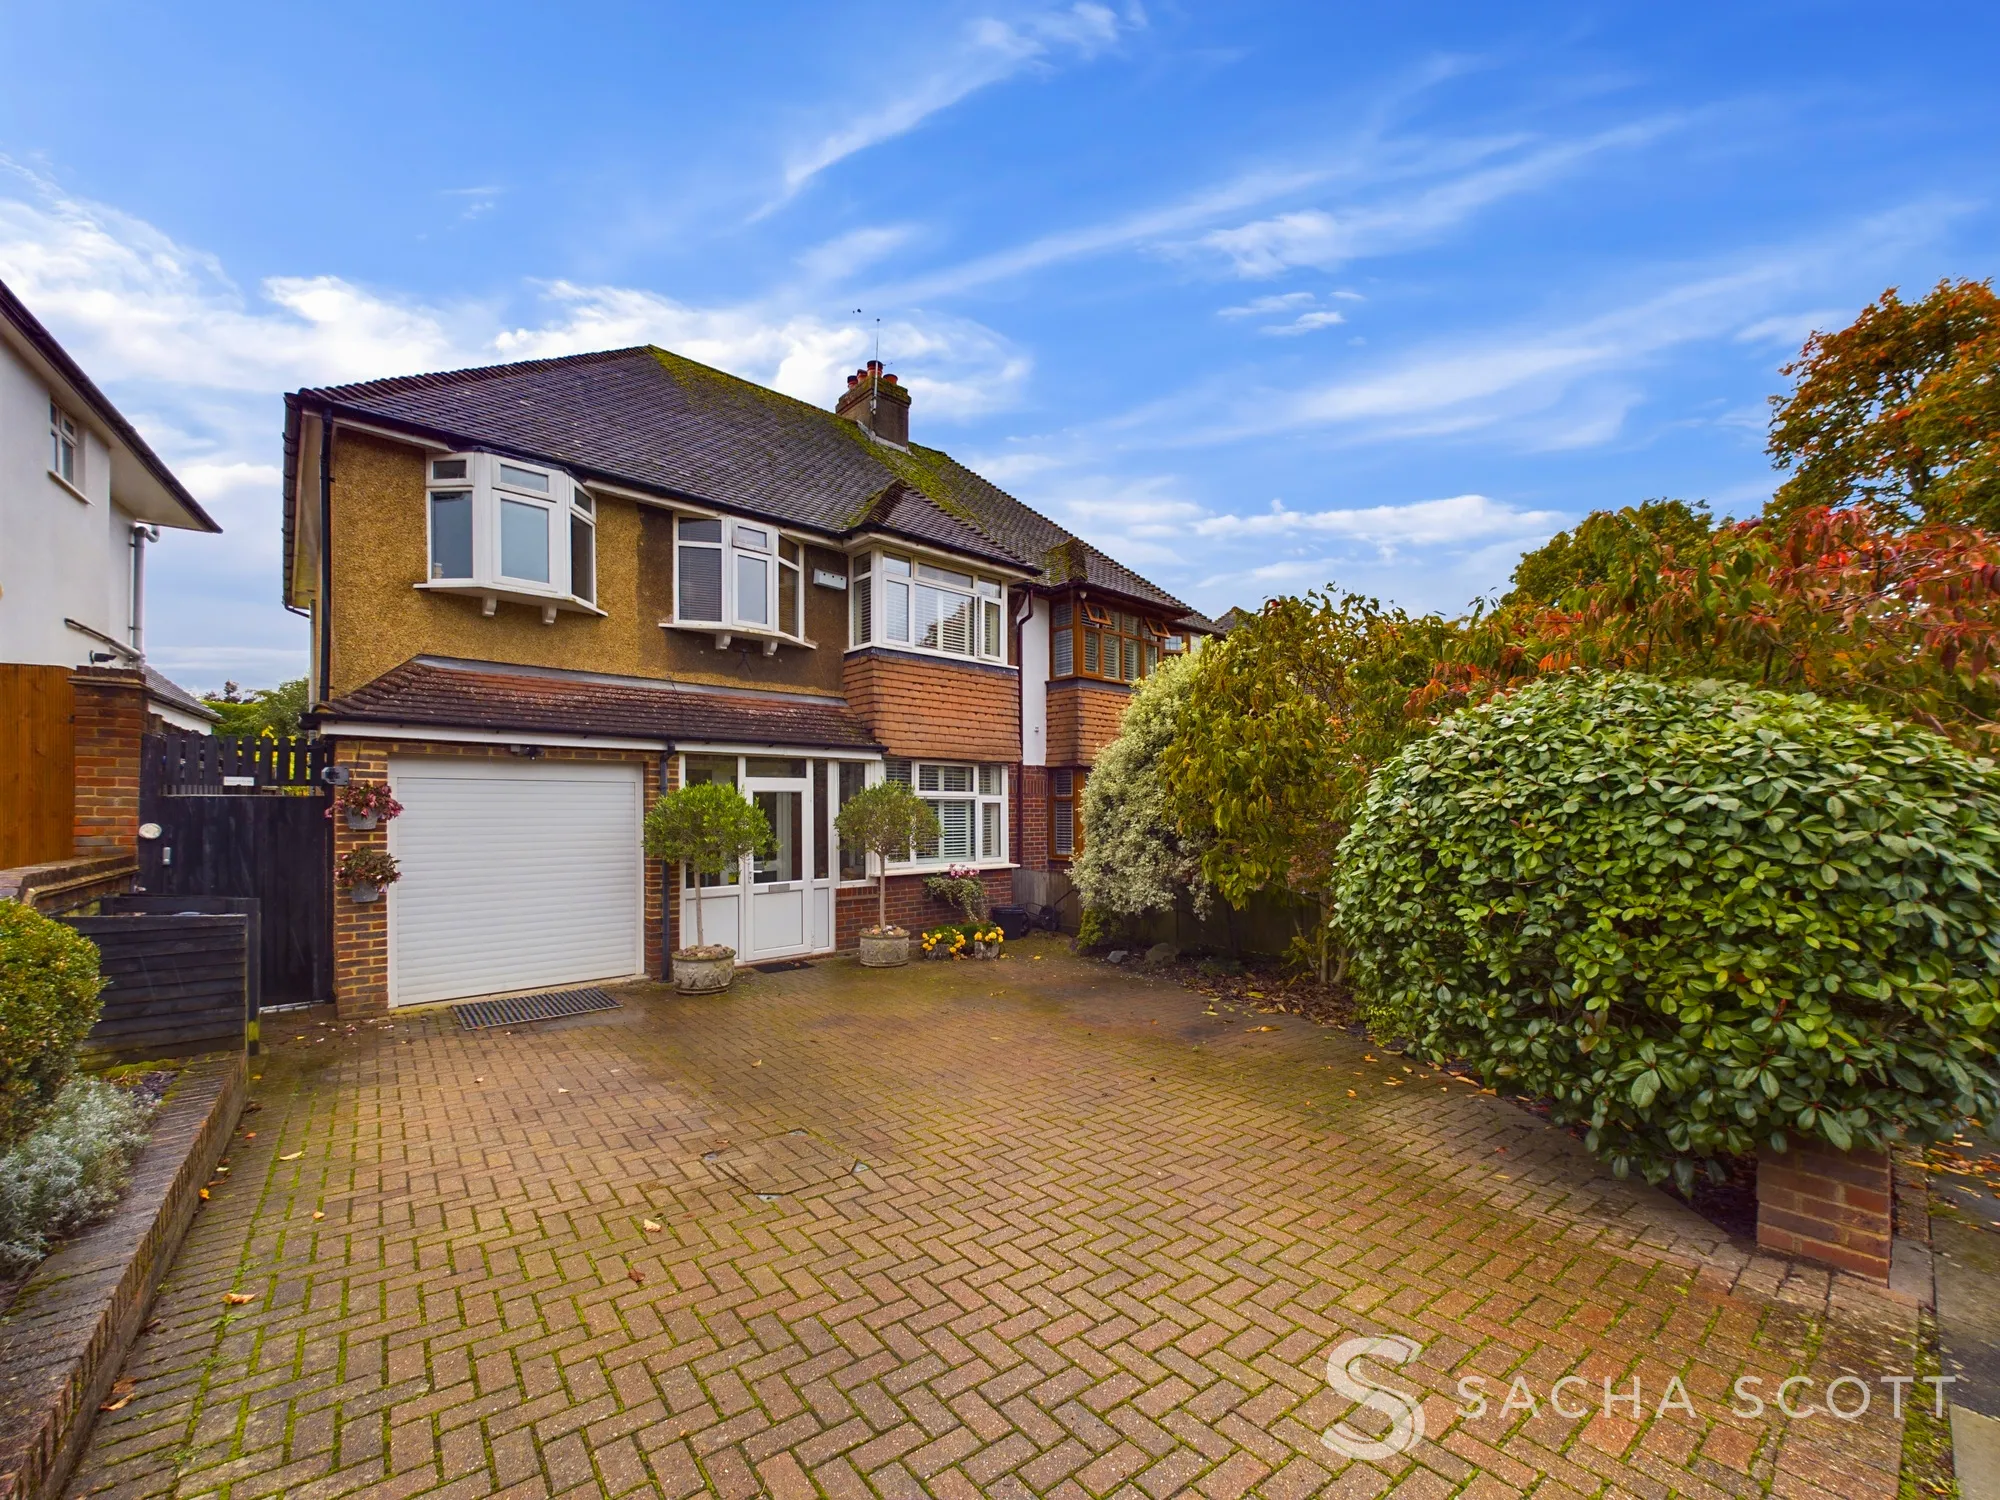 4 bed semi-detached house for sale in Parsonsfield Road, Banstead - Property Image 1